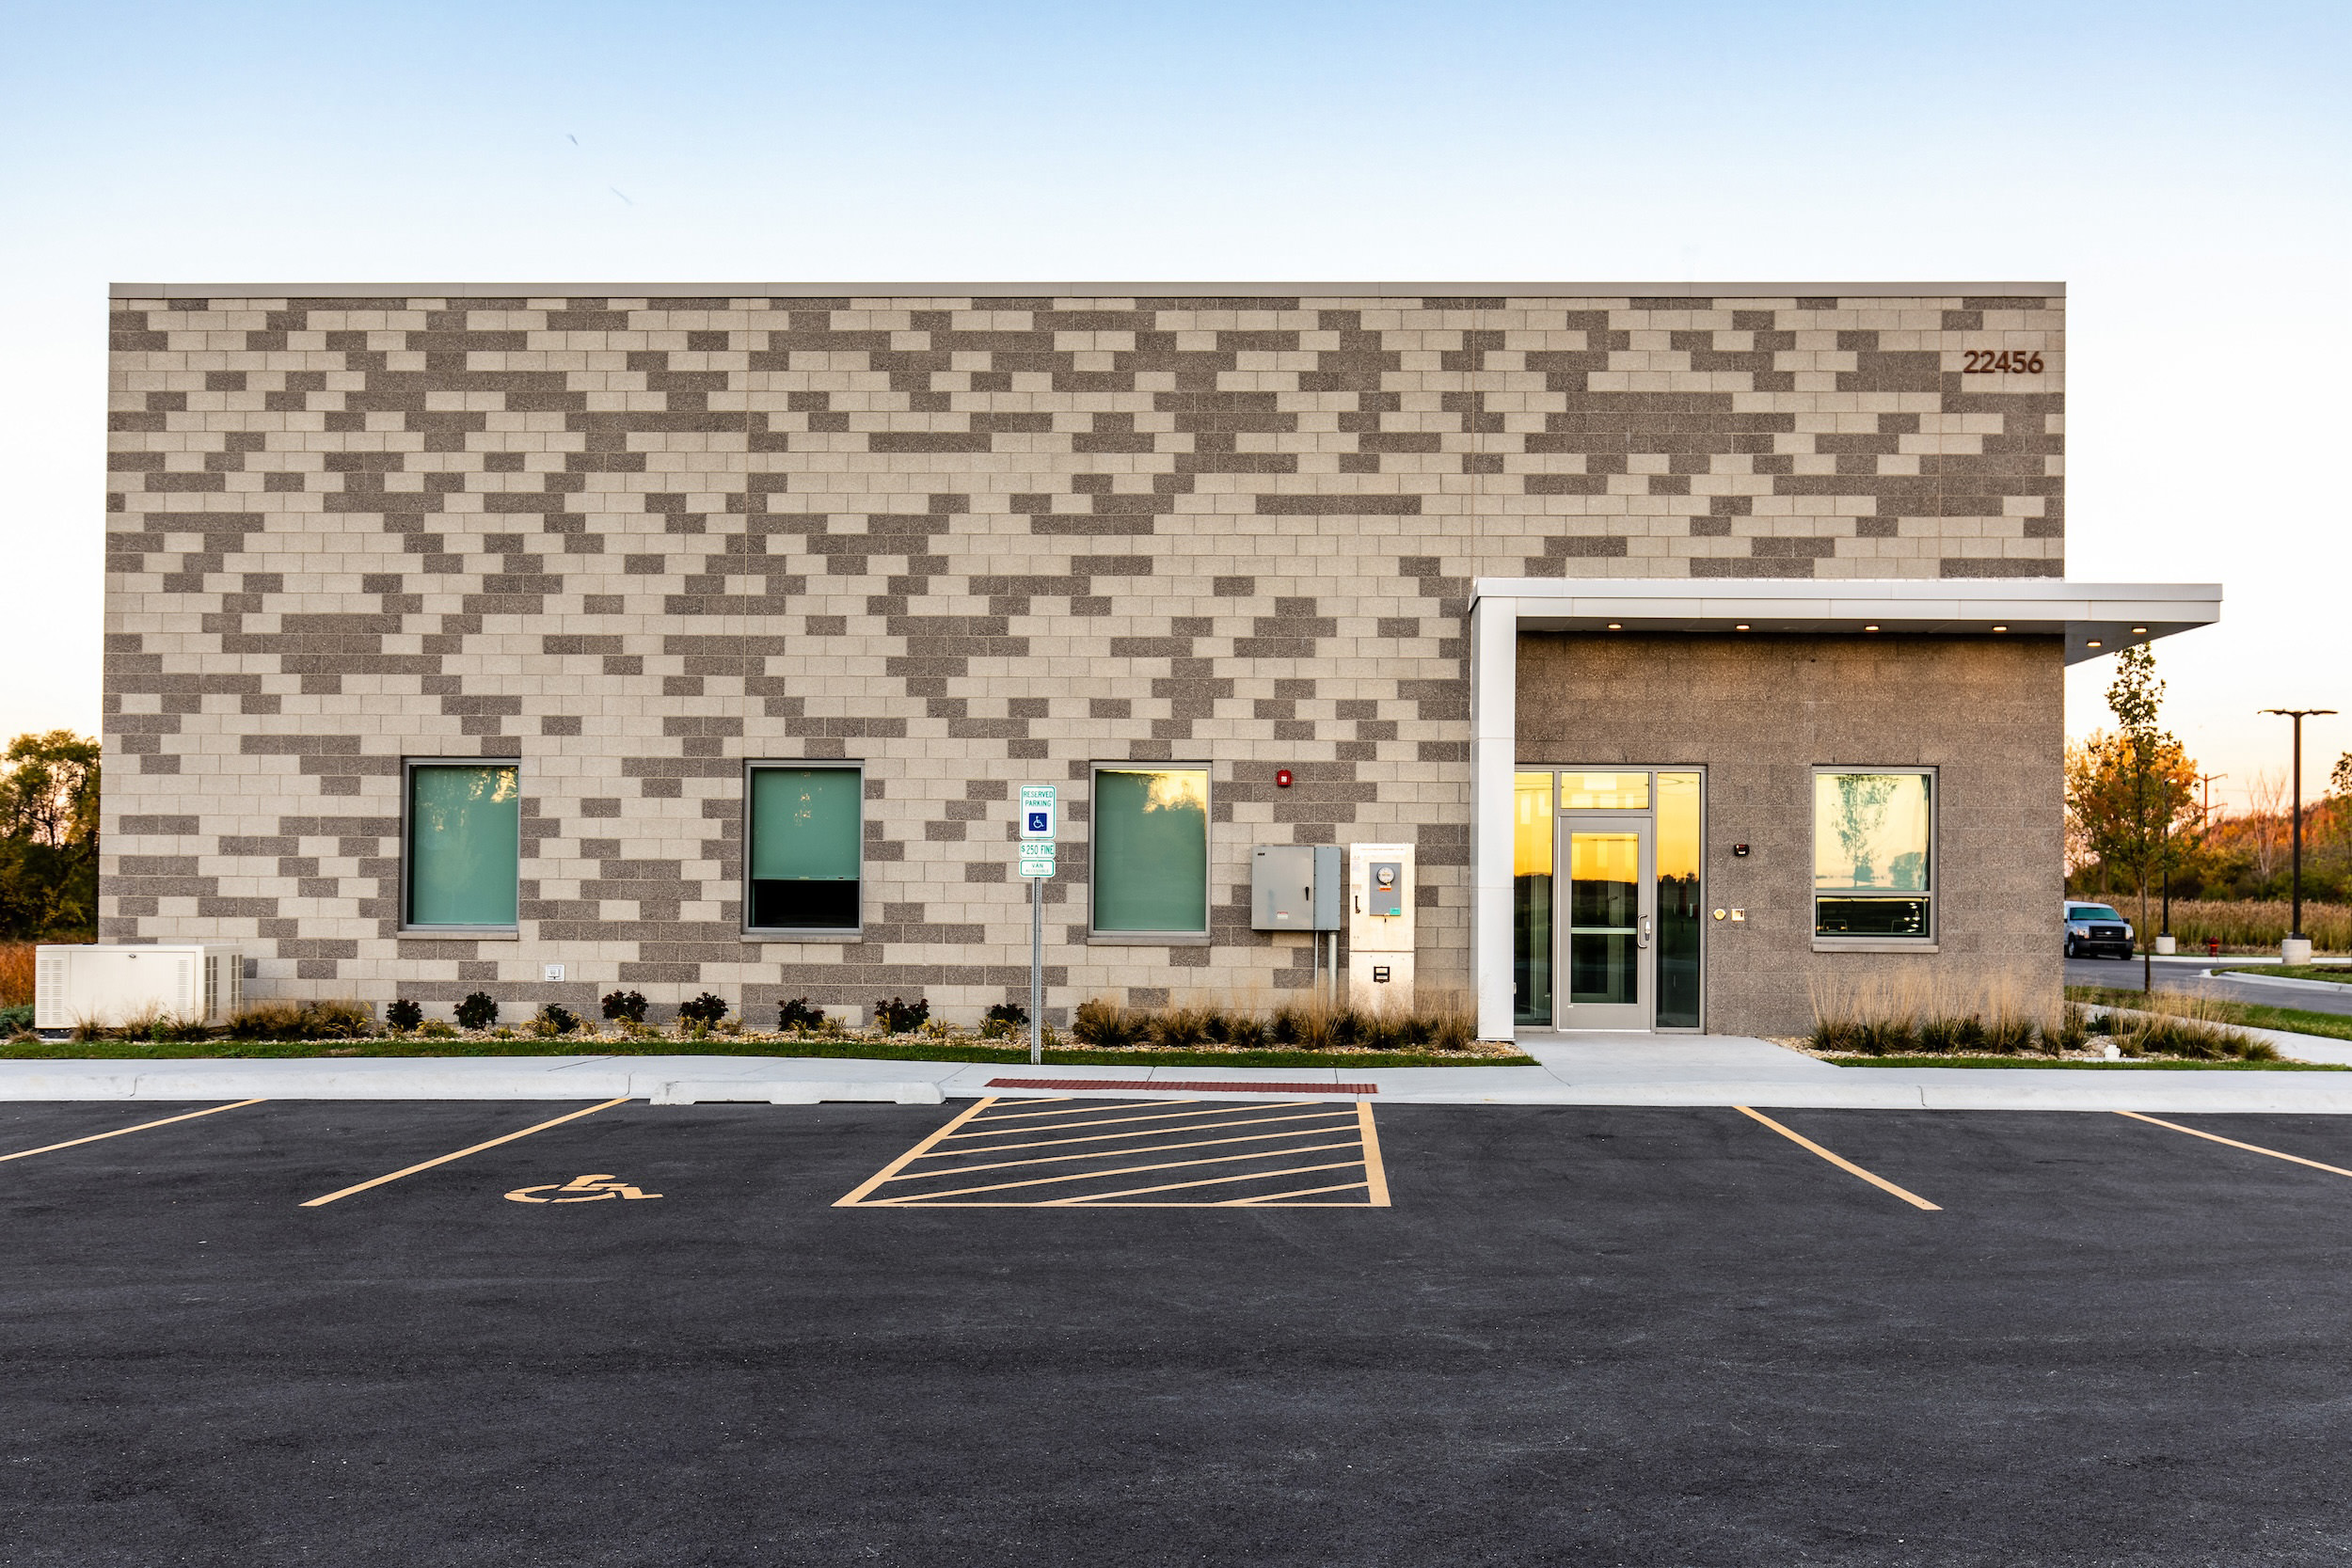 Will County EMA in Joliet, IL completed using InsulTech, Mesastone and Trendstone.